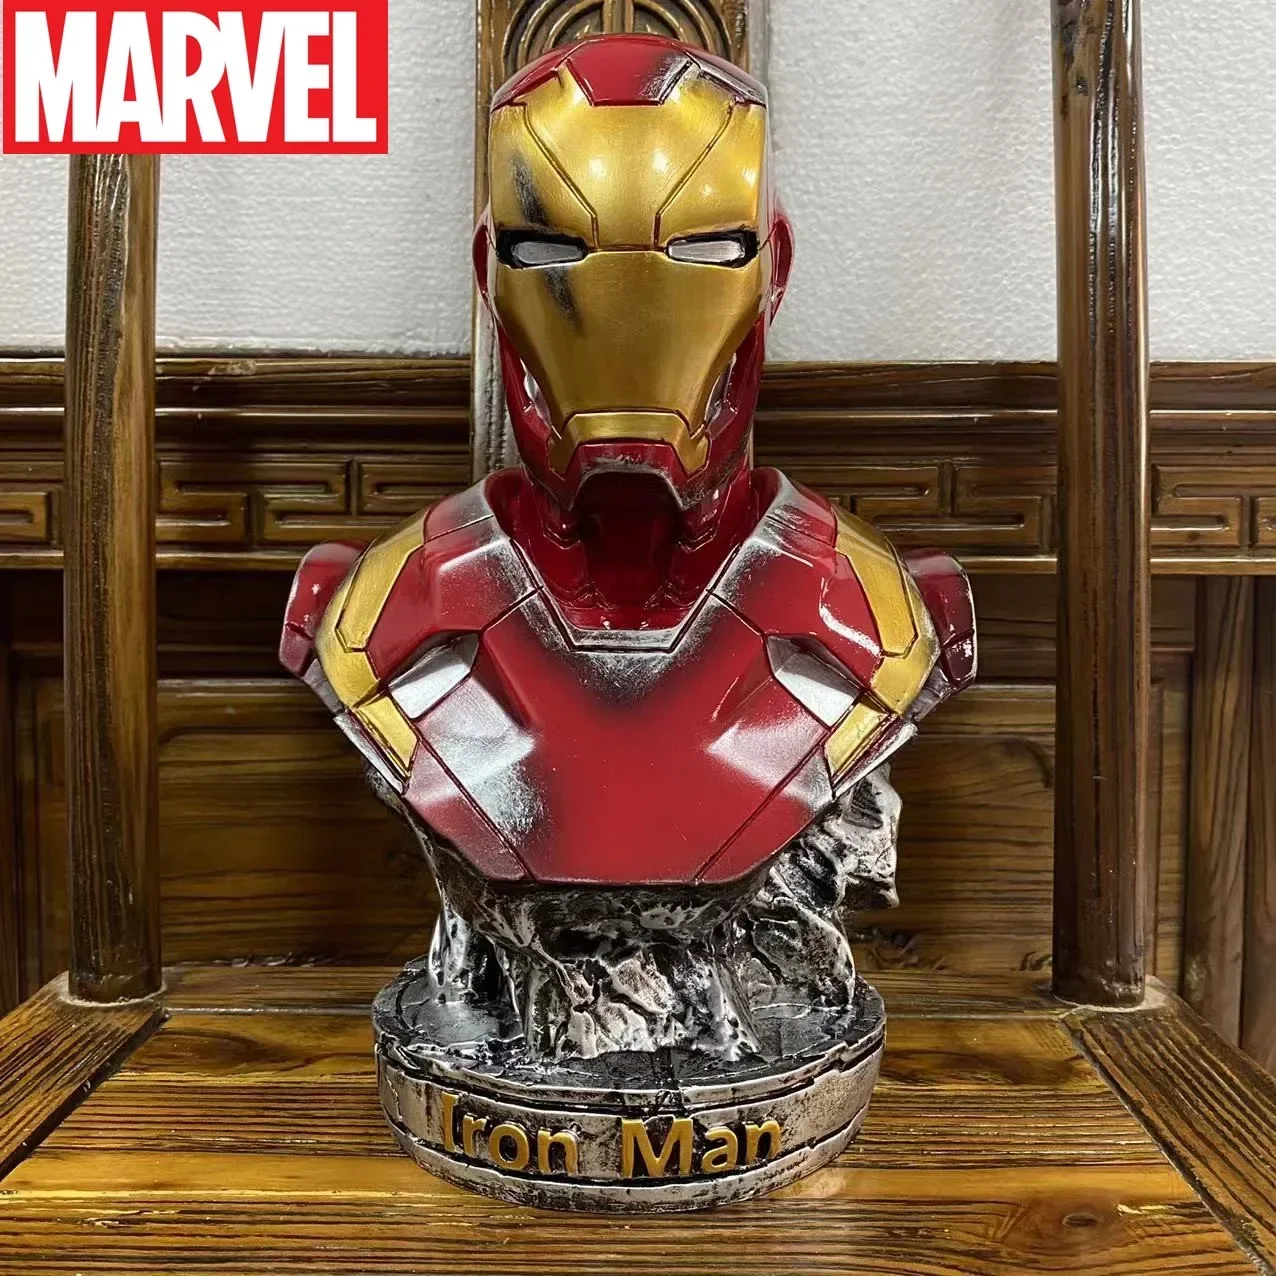 

Marvel Avengers Iron Man Anime Peripheral Black Panther Bust 1:1 Figure Bust Living Room Ornament Large Resin Children Gift